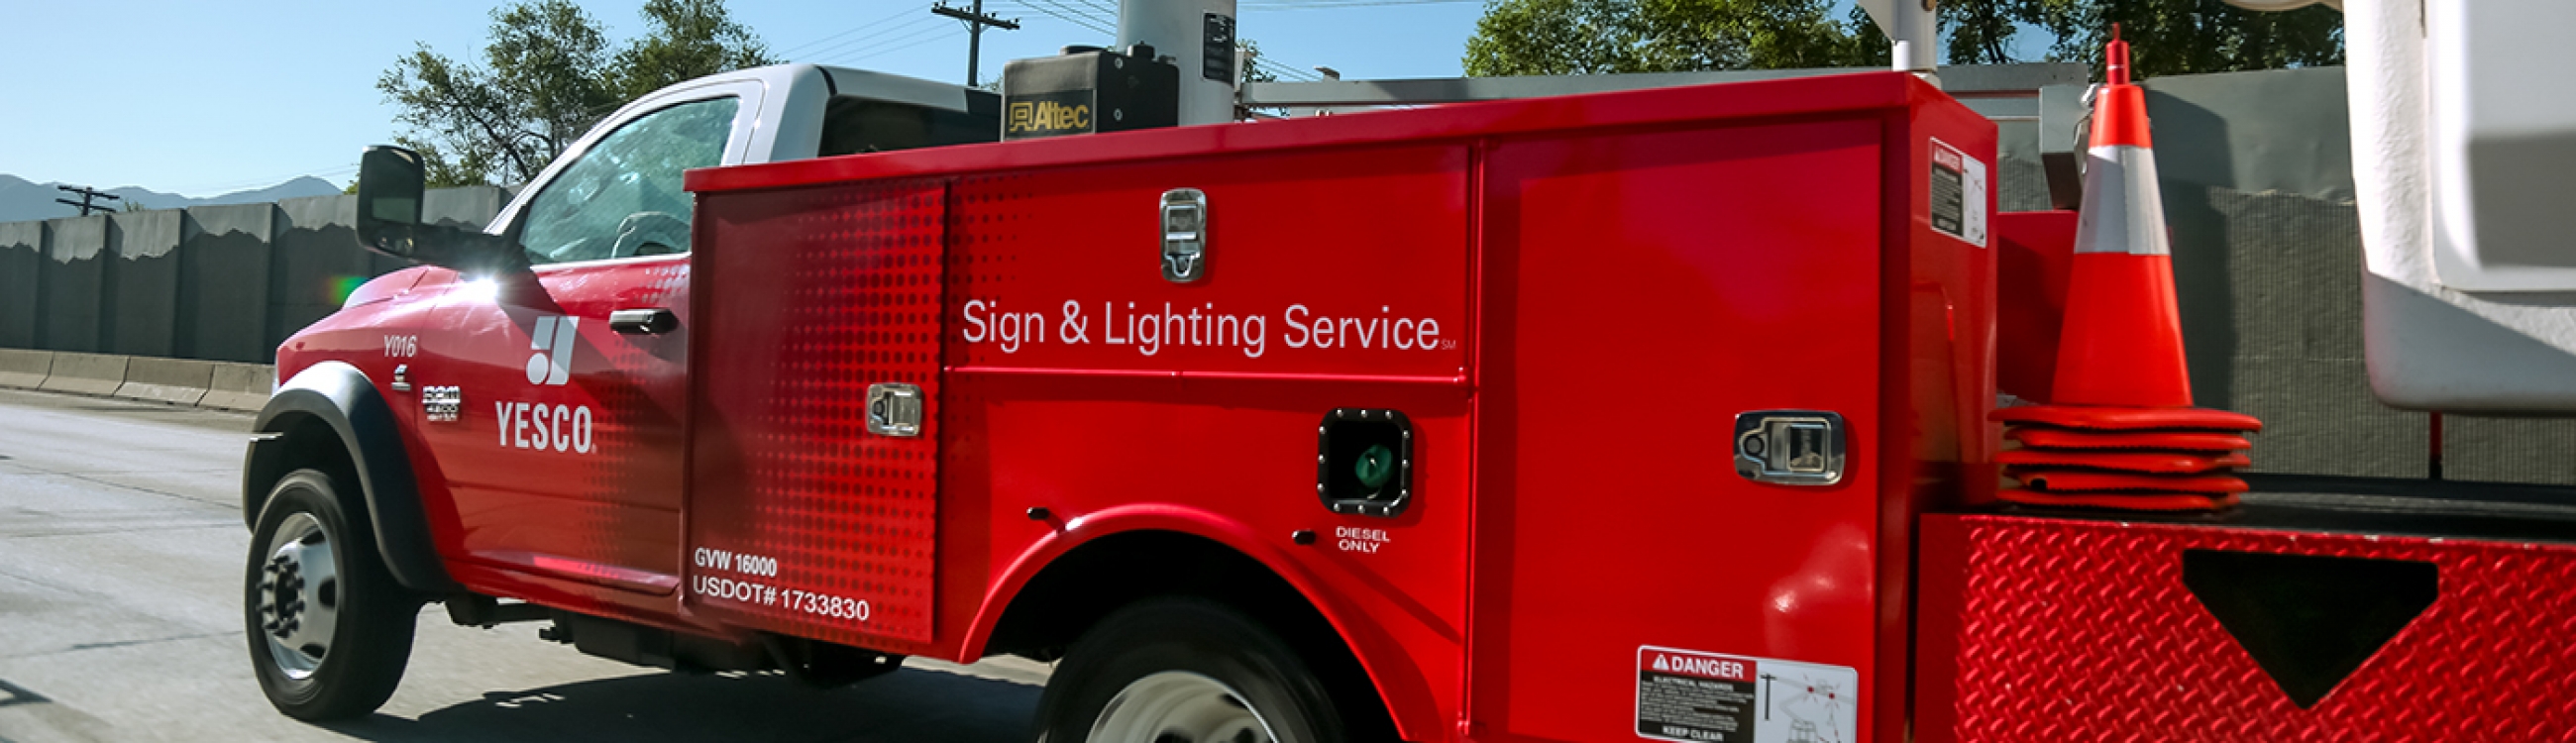 Your Local Sign and Lighting Experts in Tulsa